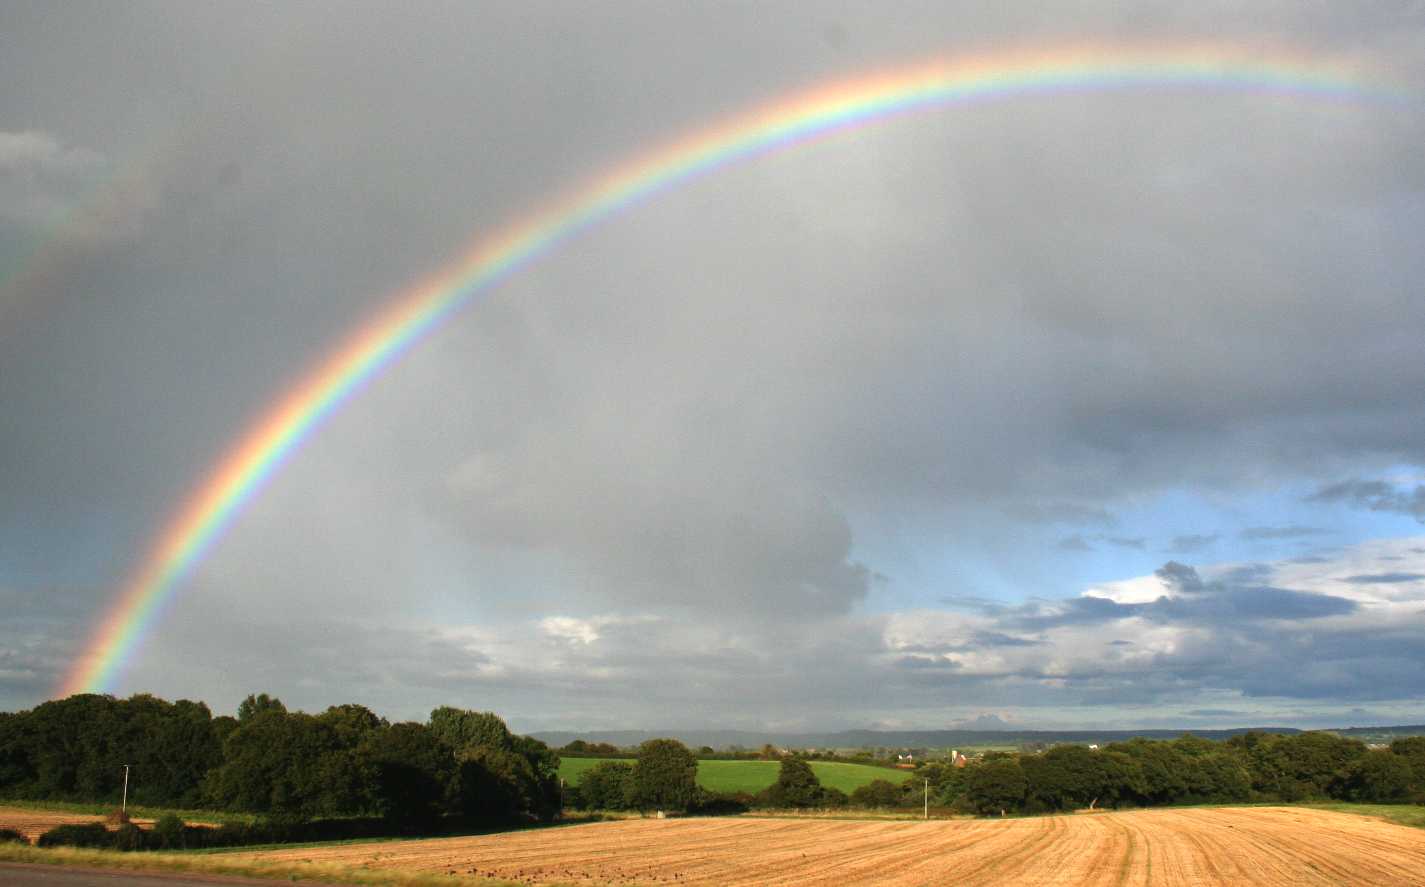 Rainbow - taken while driving back from Bristol